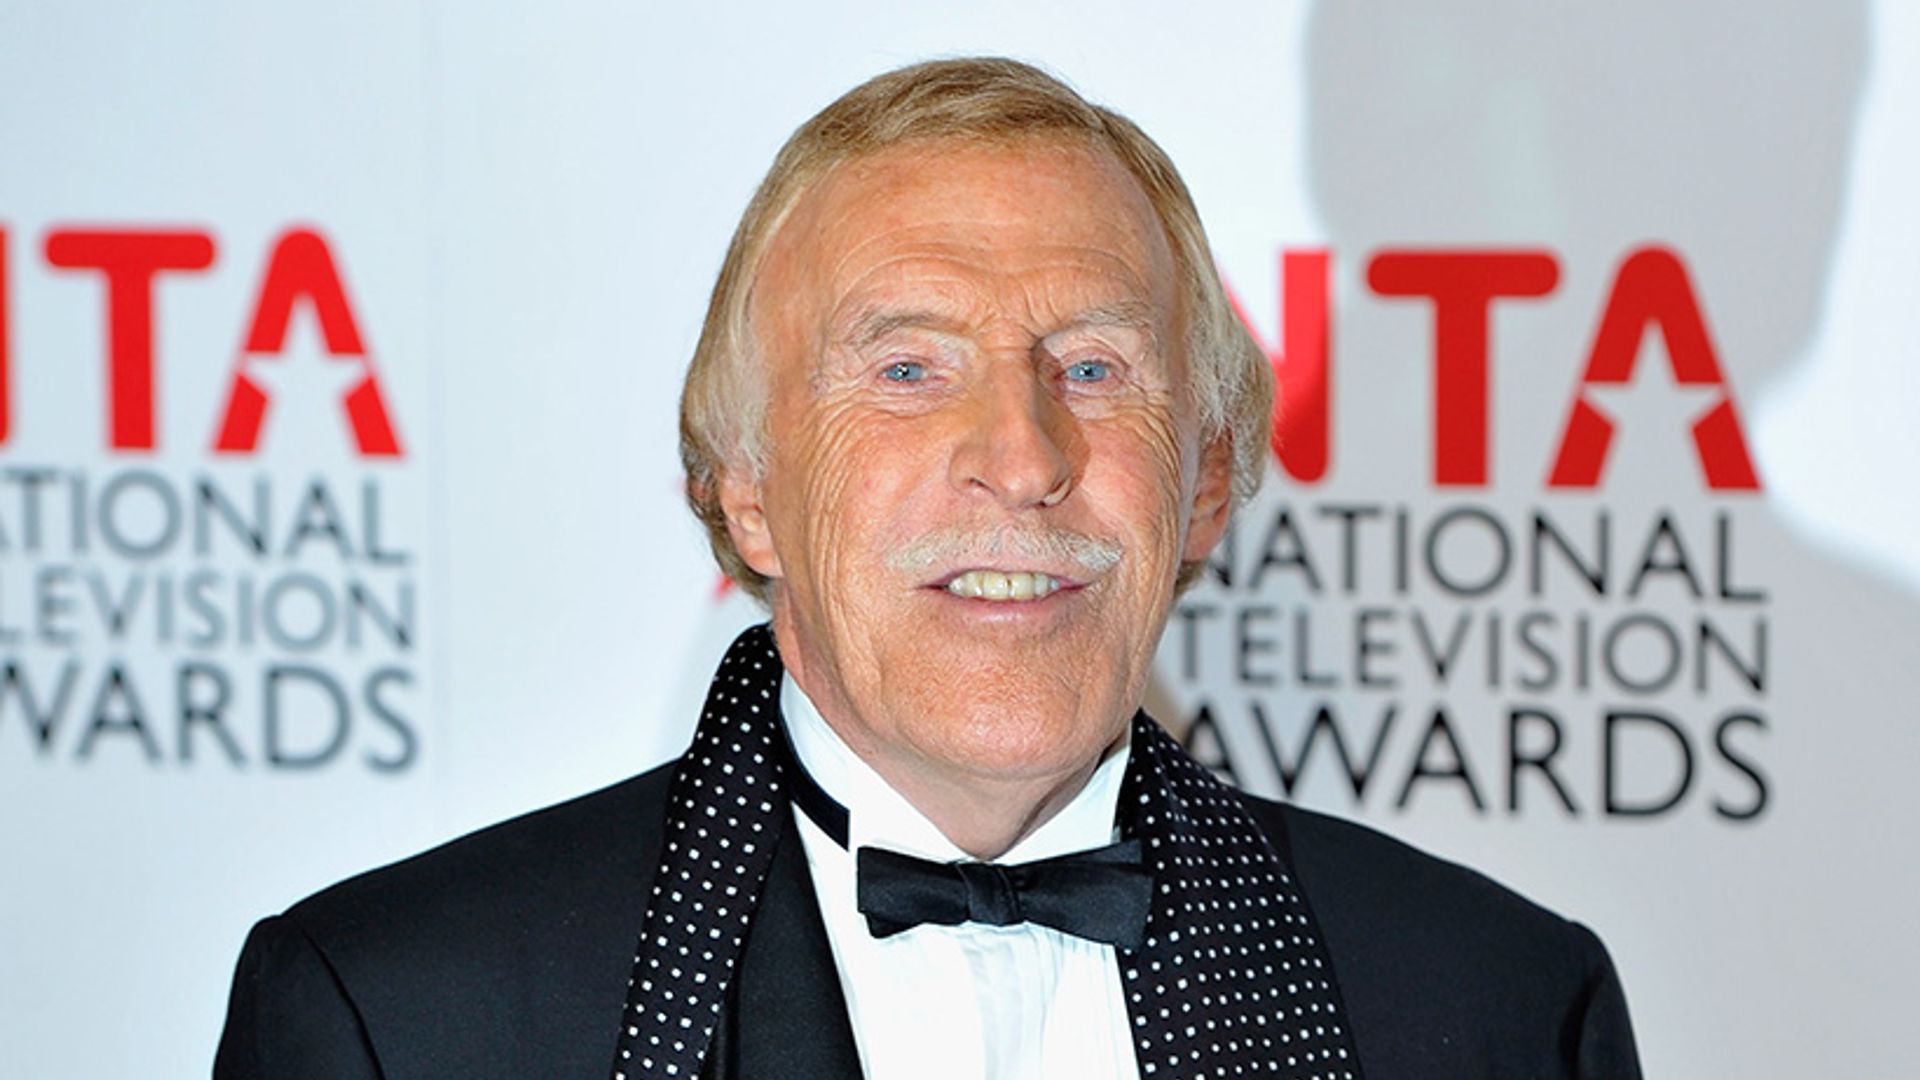 Bruce Forsyth is feeling better and laughing again says close friend Jimmy Tarbuck